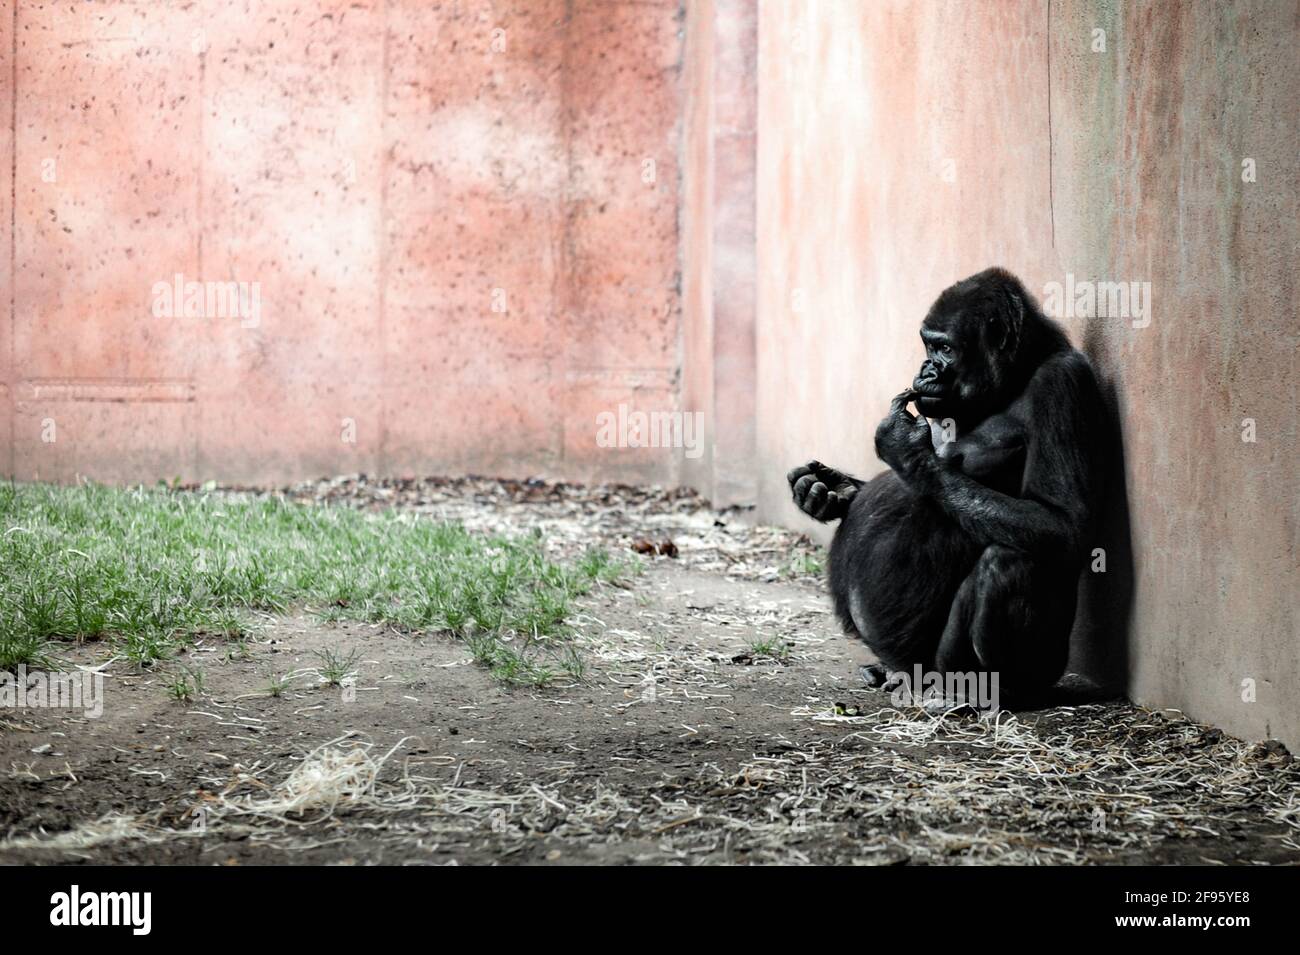 A day in the life of a gorilla Stock Photo